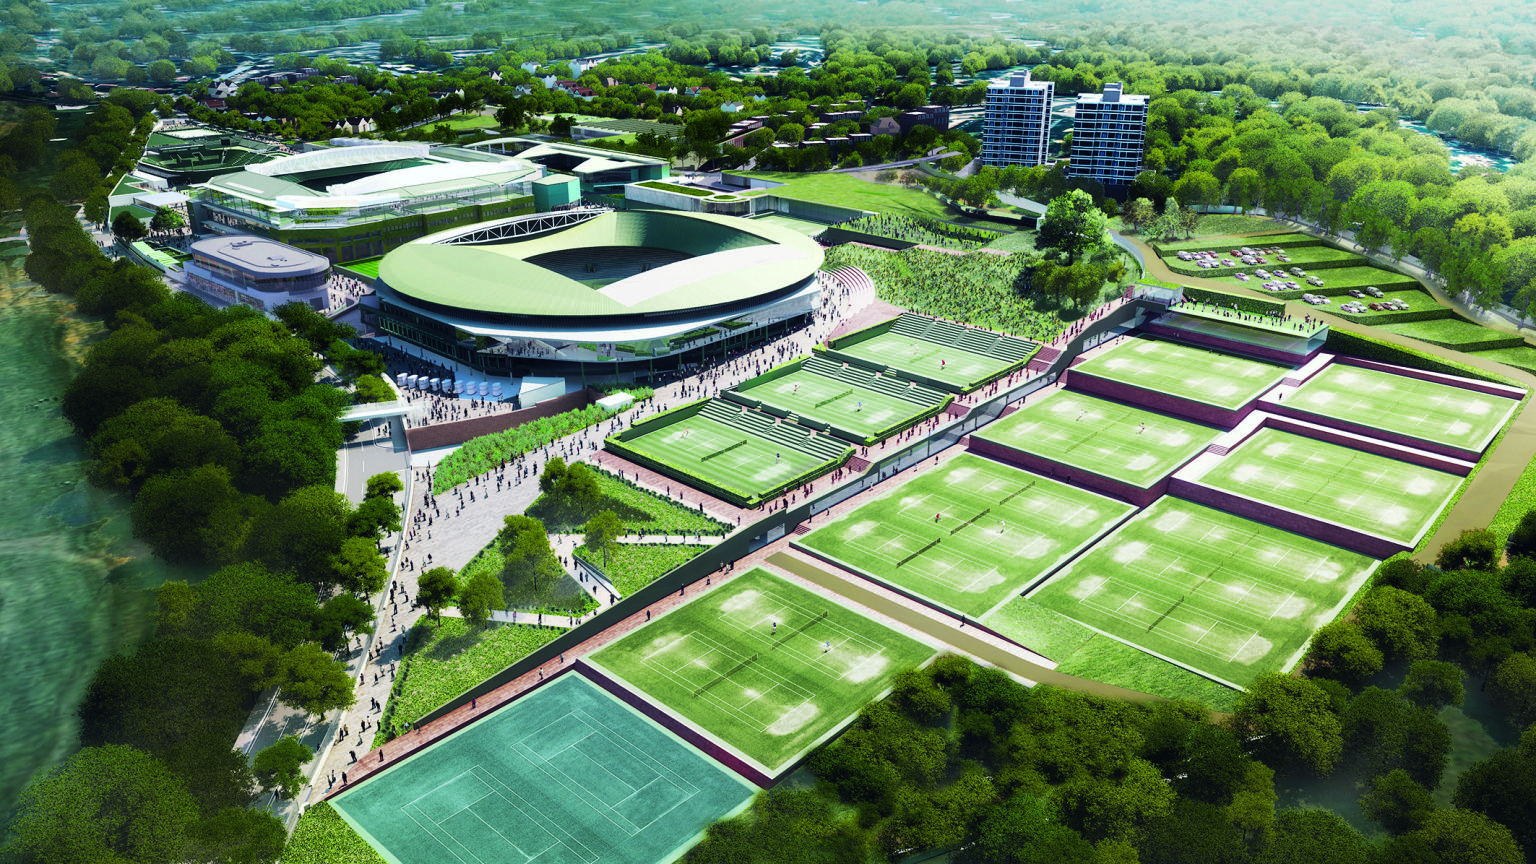 Wimbledon Master Plan - overview of north area, artists impression